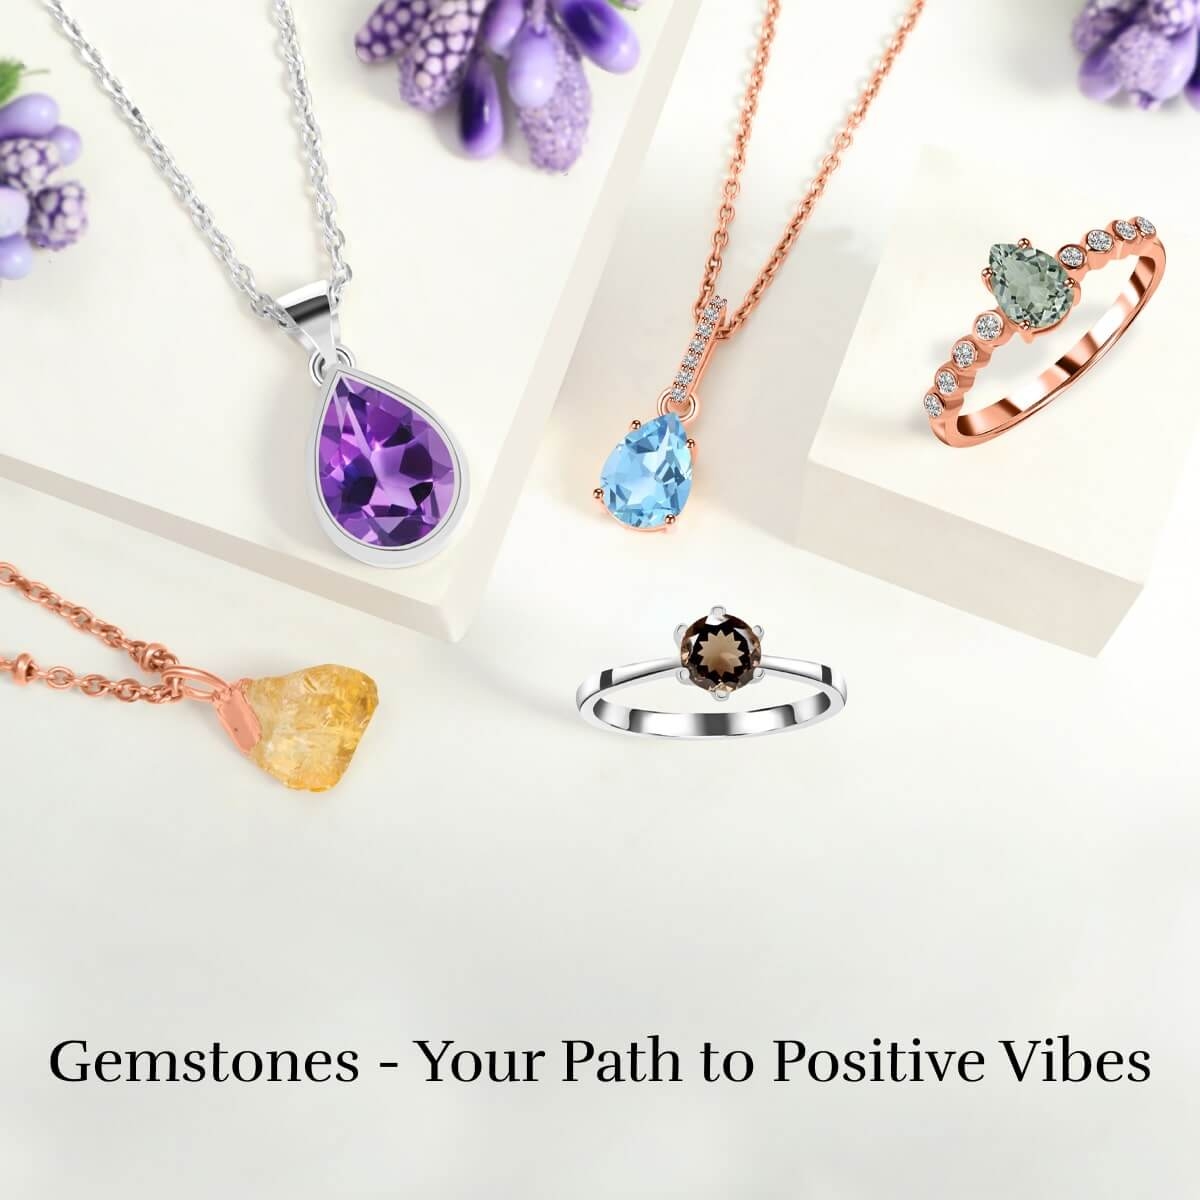 Good Luck Gemstones to Attract Positive Energy